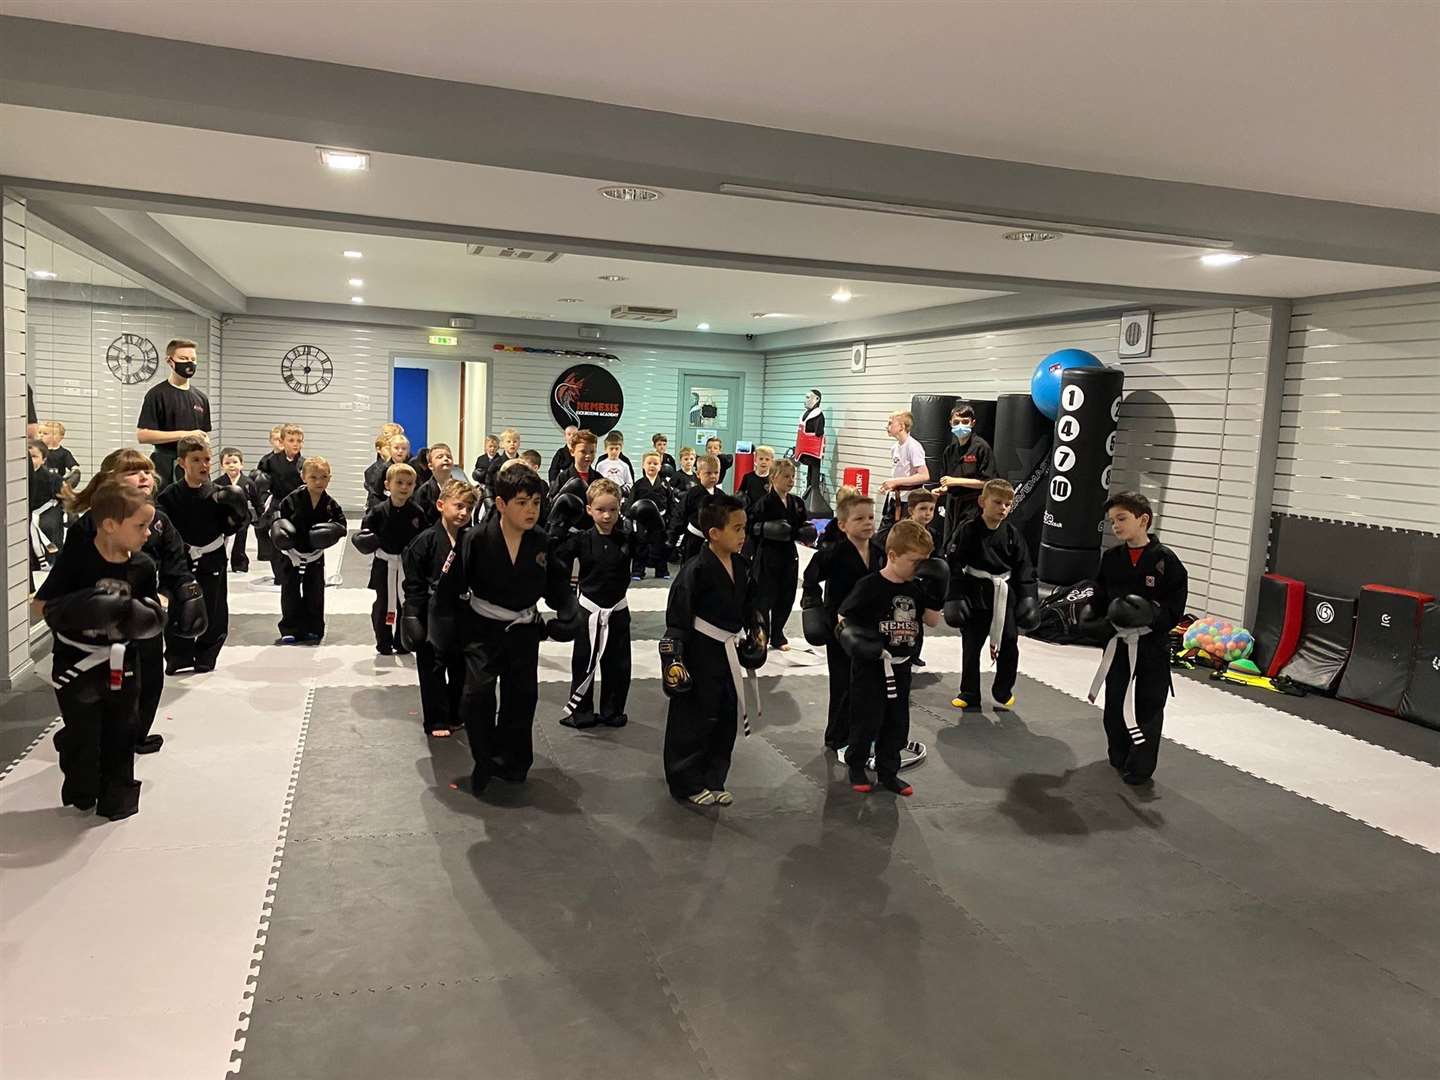 The kickboxing academy has had an influx of new members.